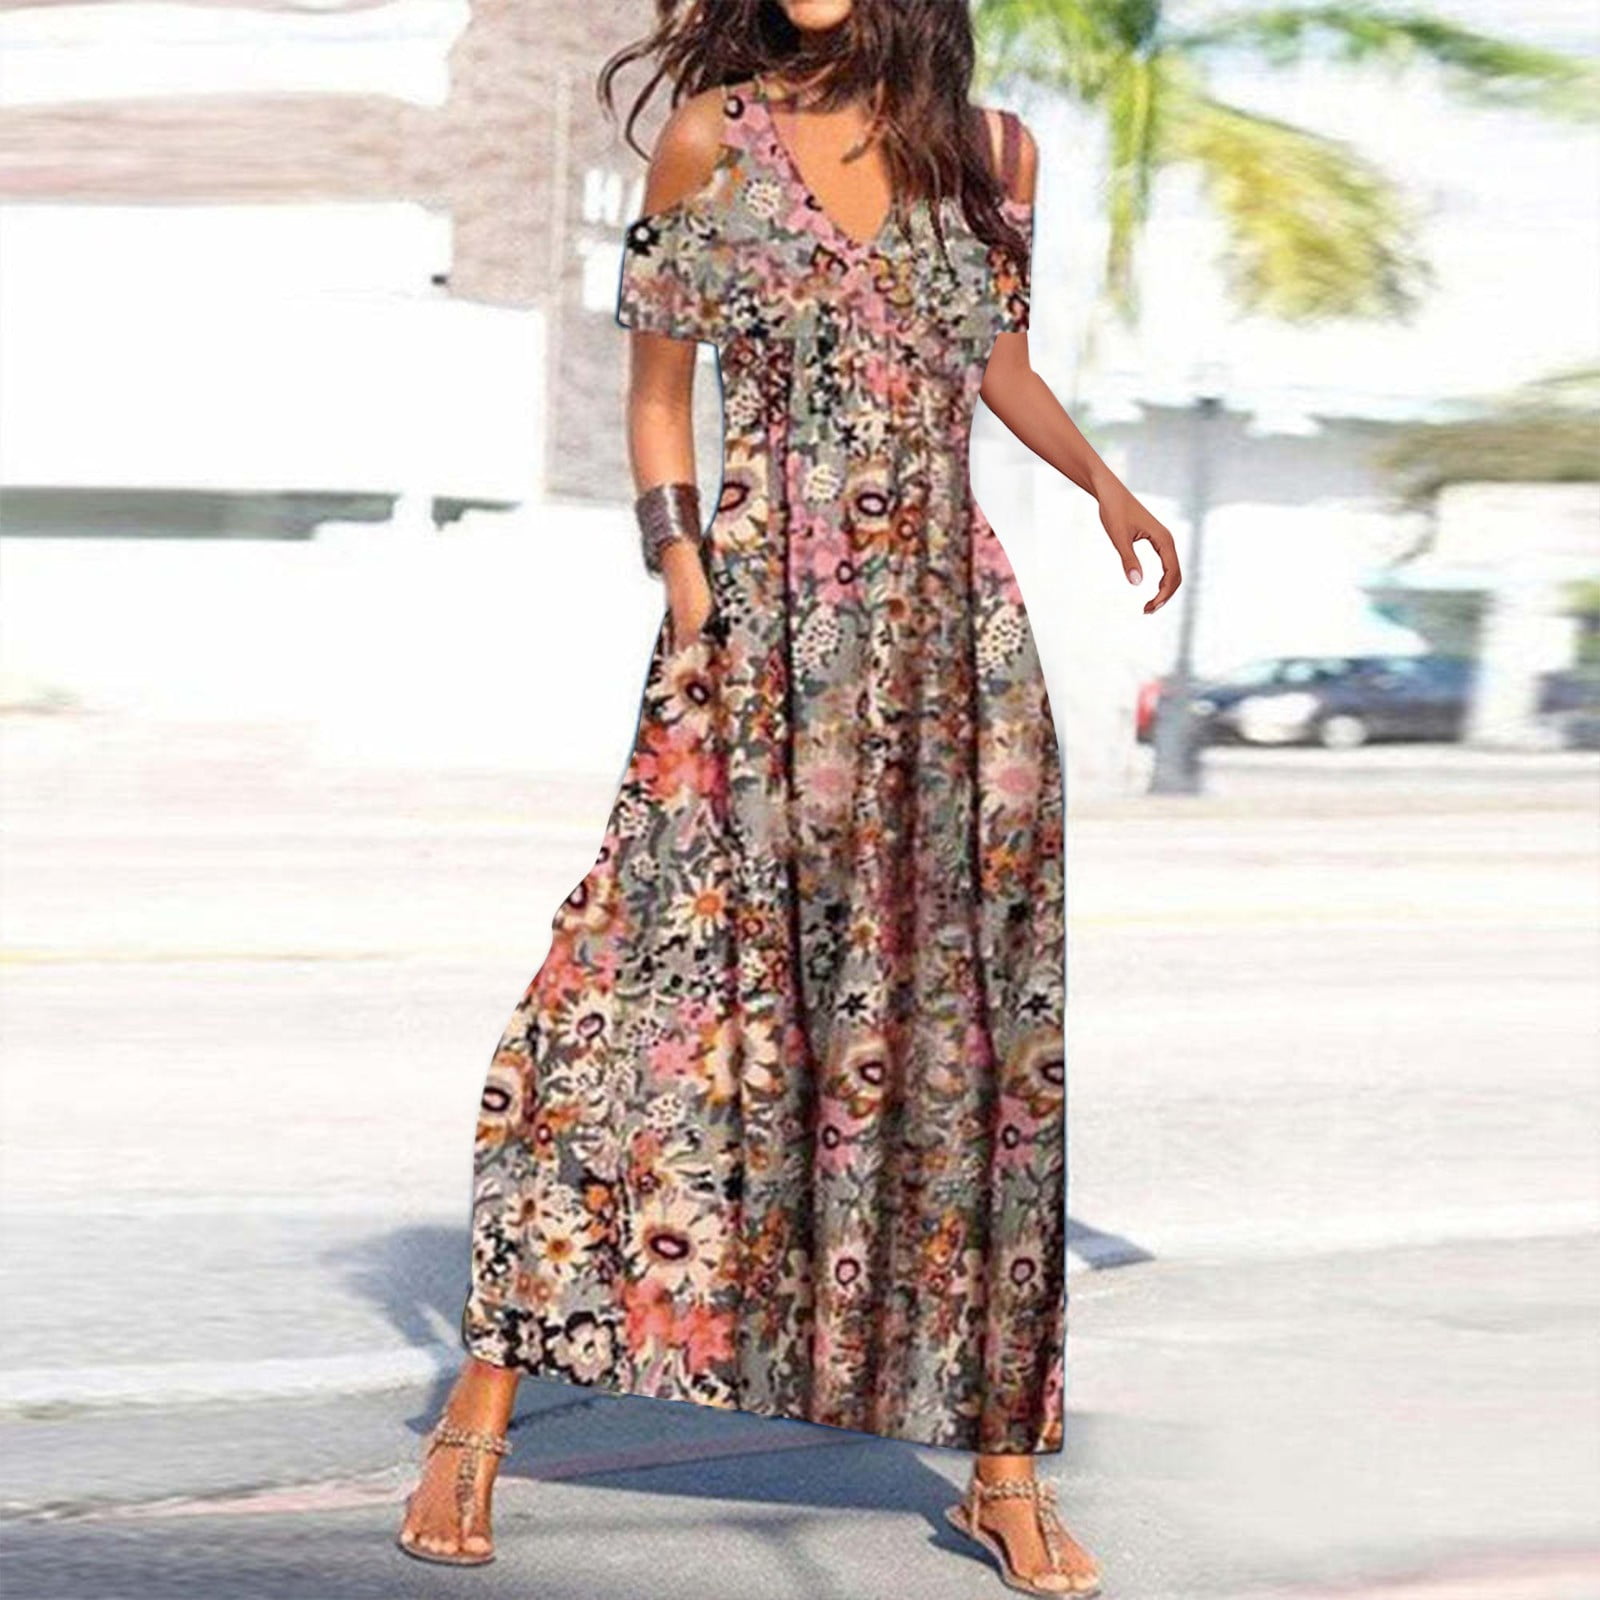 Dress For Fashion Casual V Neck Sleeveless Print Sling Dress With Packet Casual Long Maxi Dress Dress with Shorts Cotton Maxi Dresses for Women Summer Loose Dresses for Women Summer